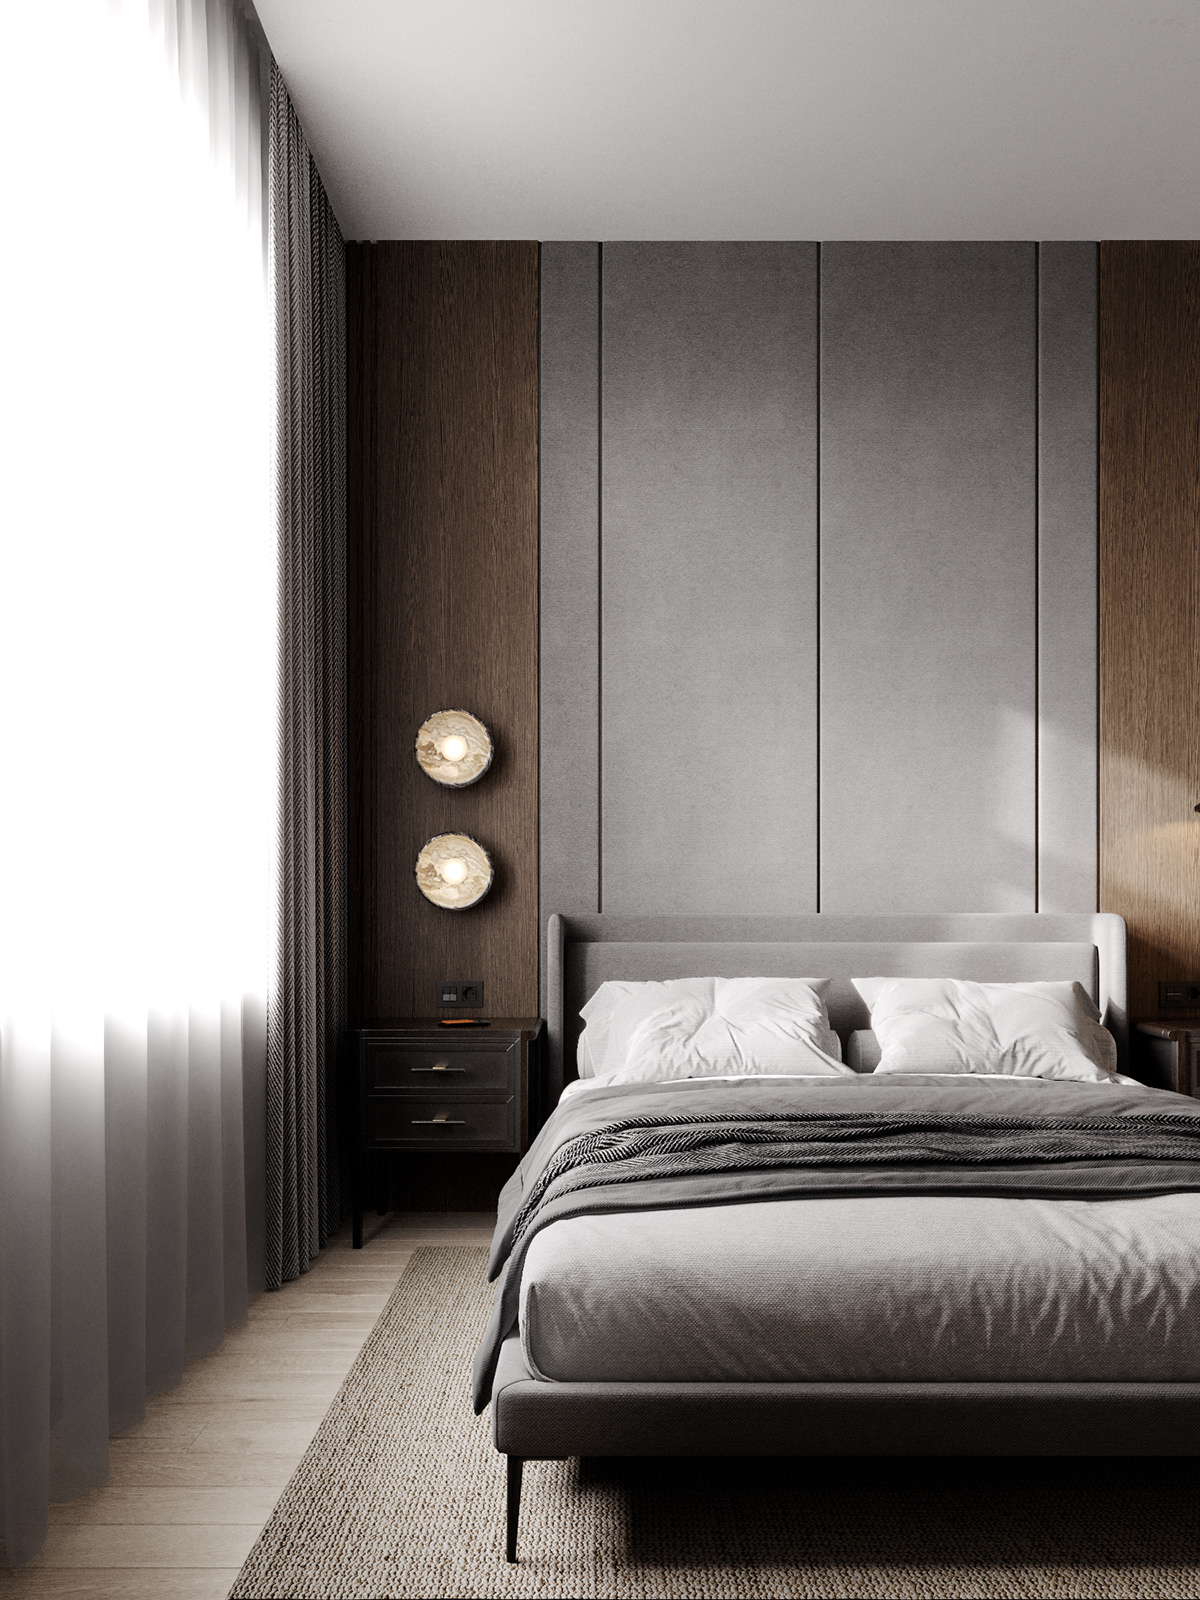 The main color in the bedroom is white-gray, emphasizing lightness, comfort, and coolness. The light brown carpet gives the bedroom a clean and decent appearance.